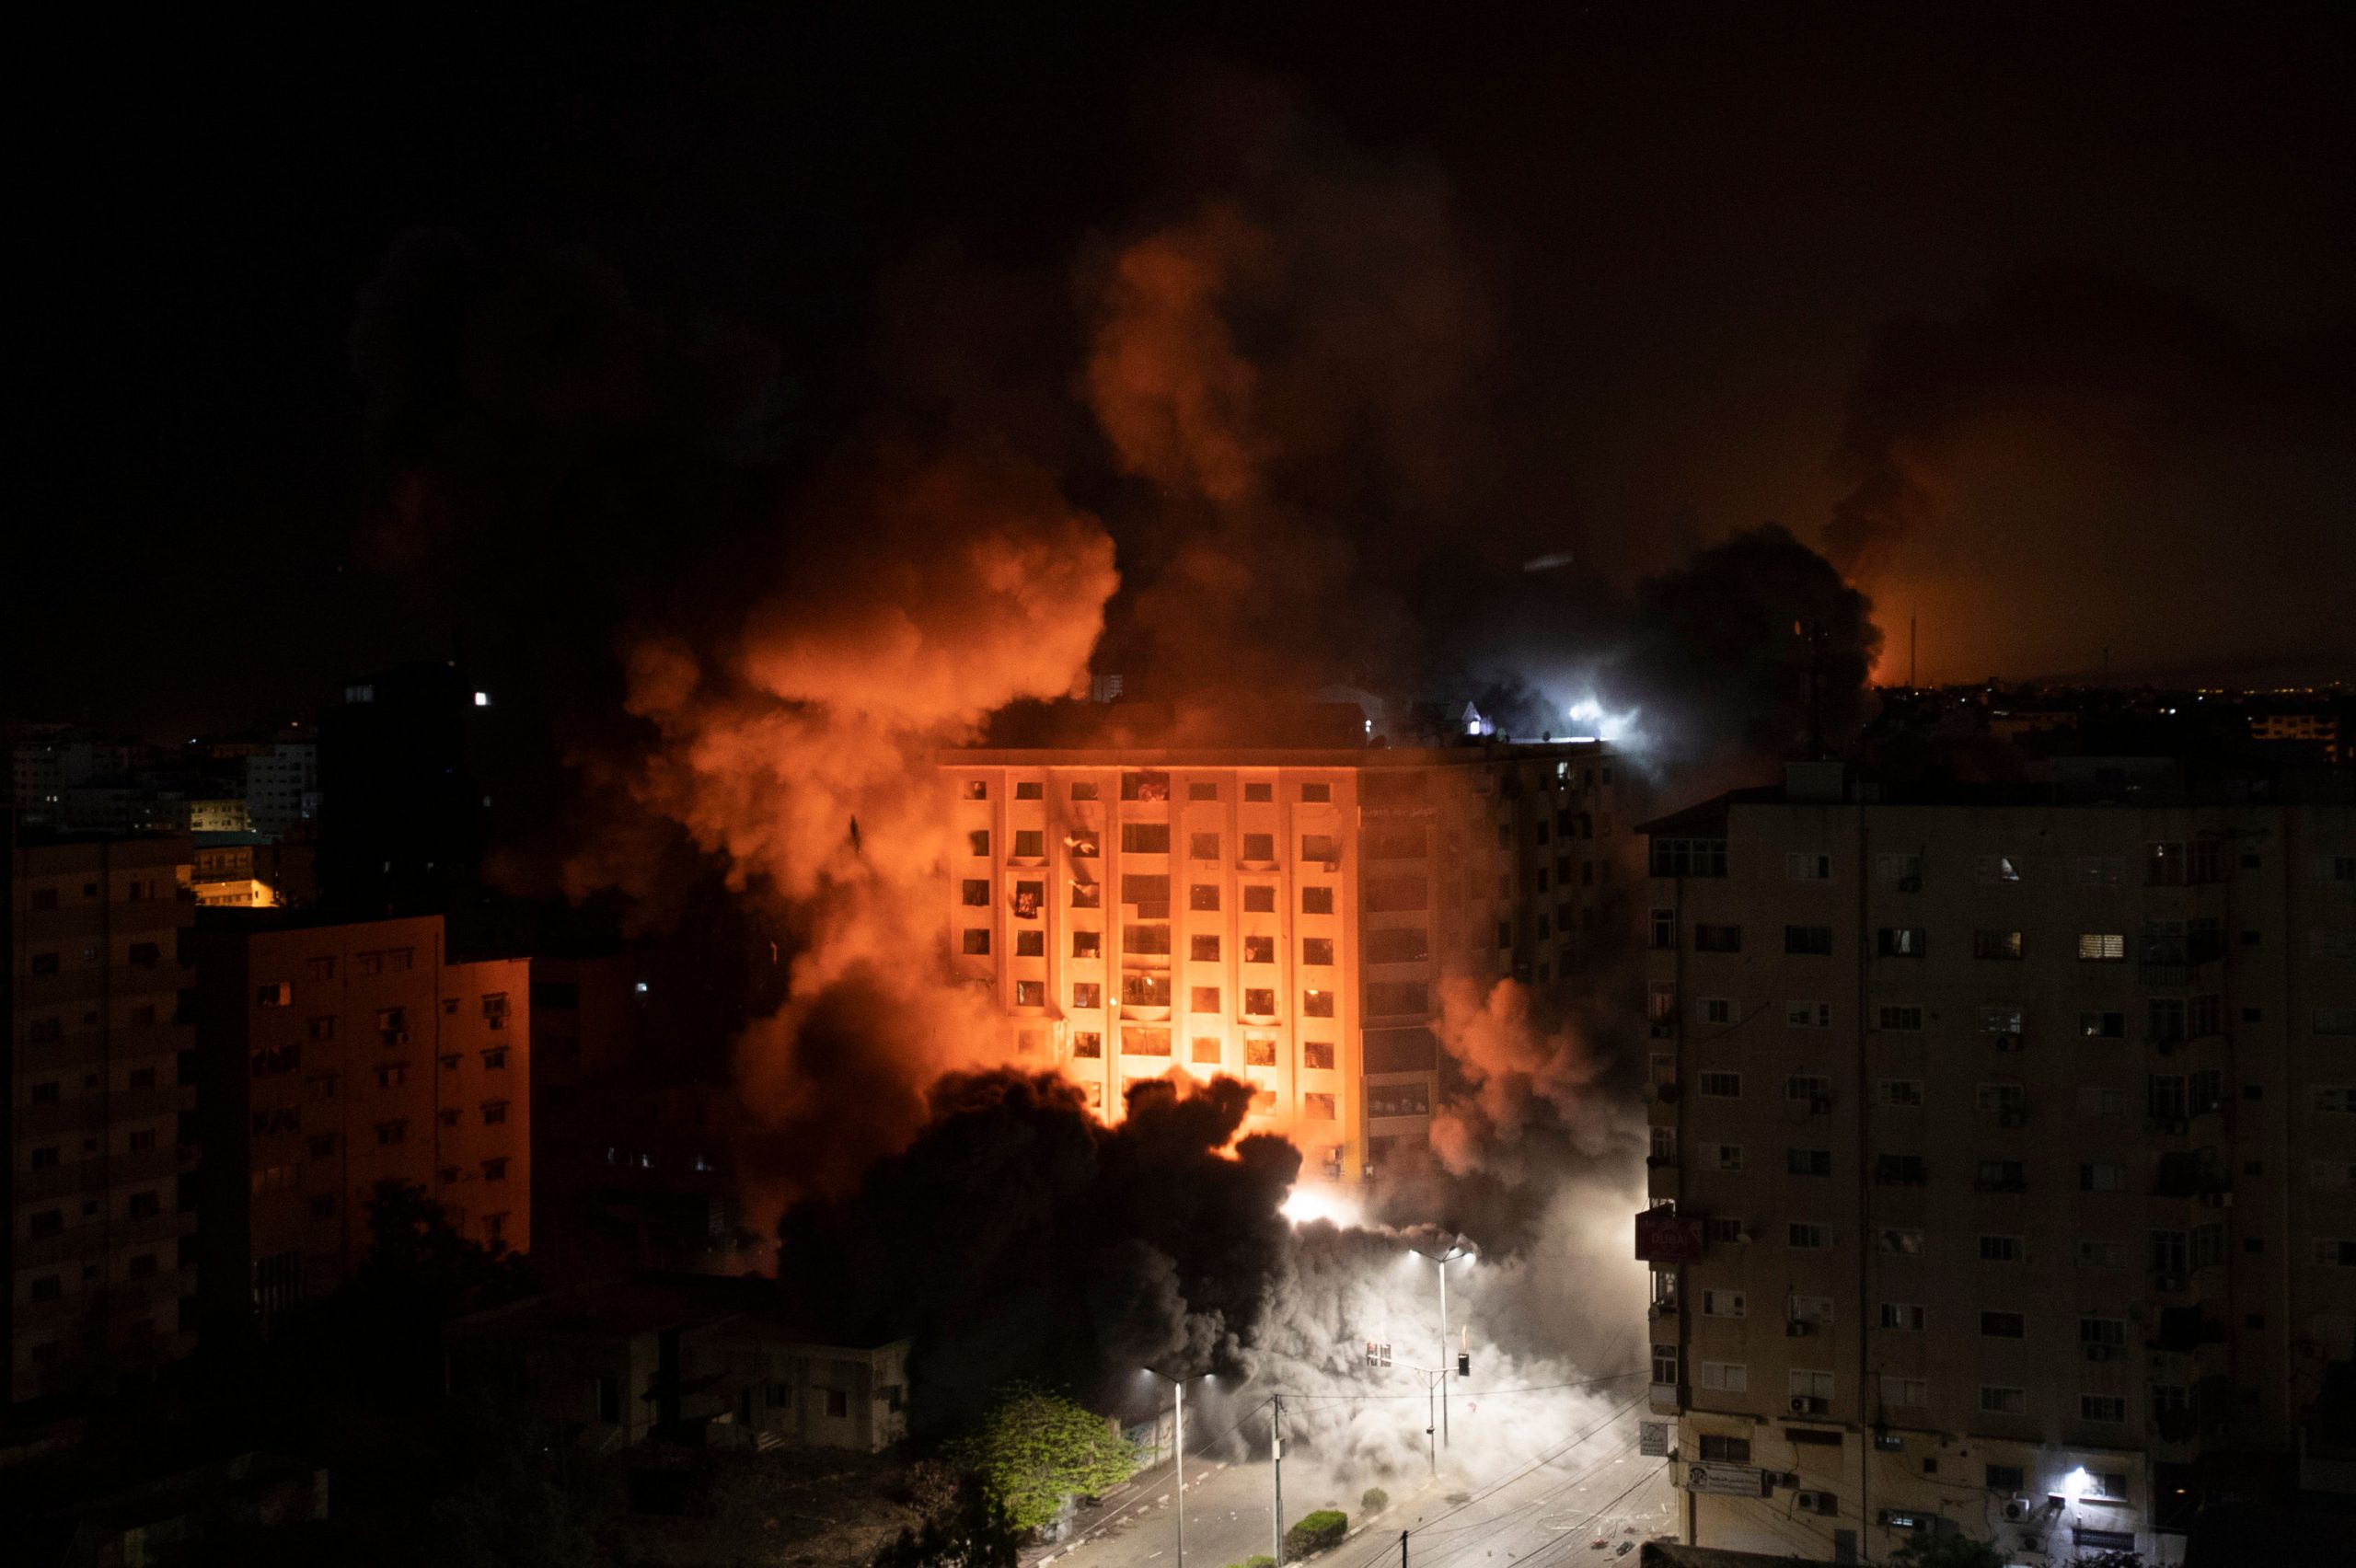 Explained: What has led to recent Israel-Palestine clashes in Jerusalem